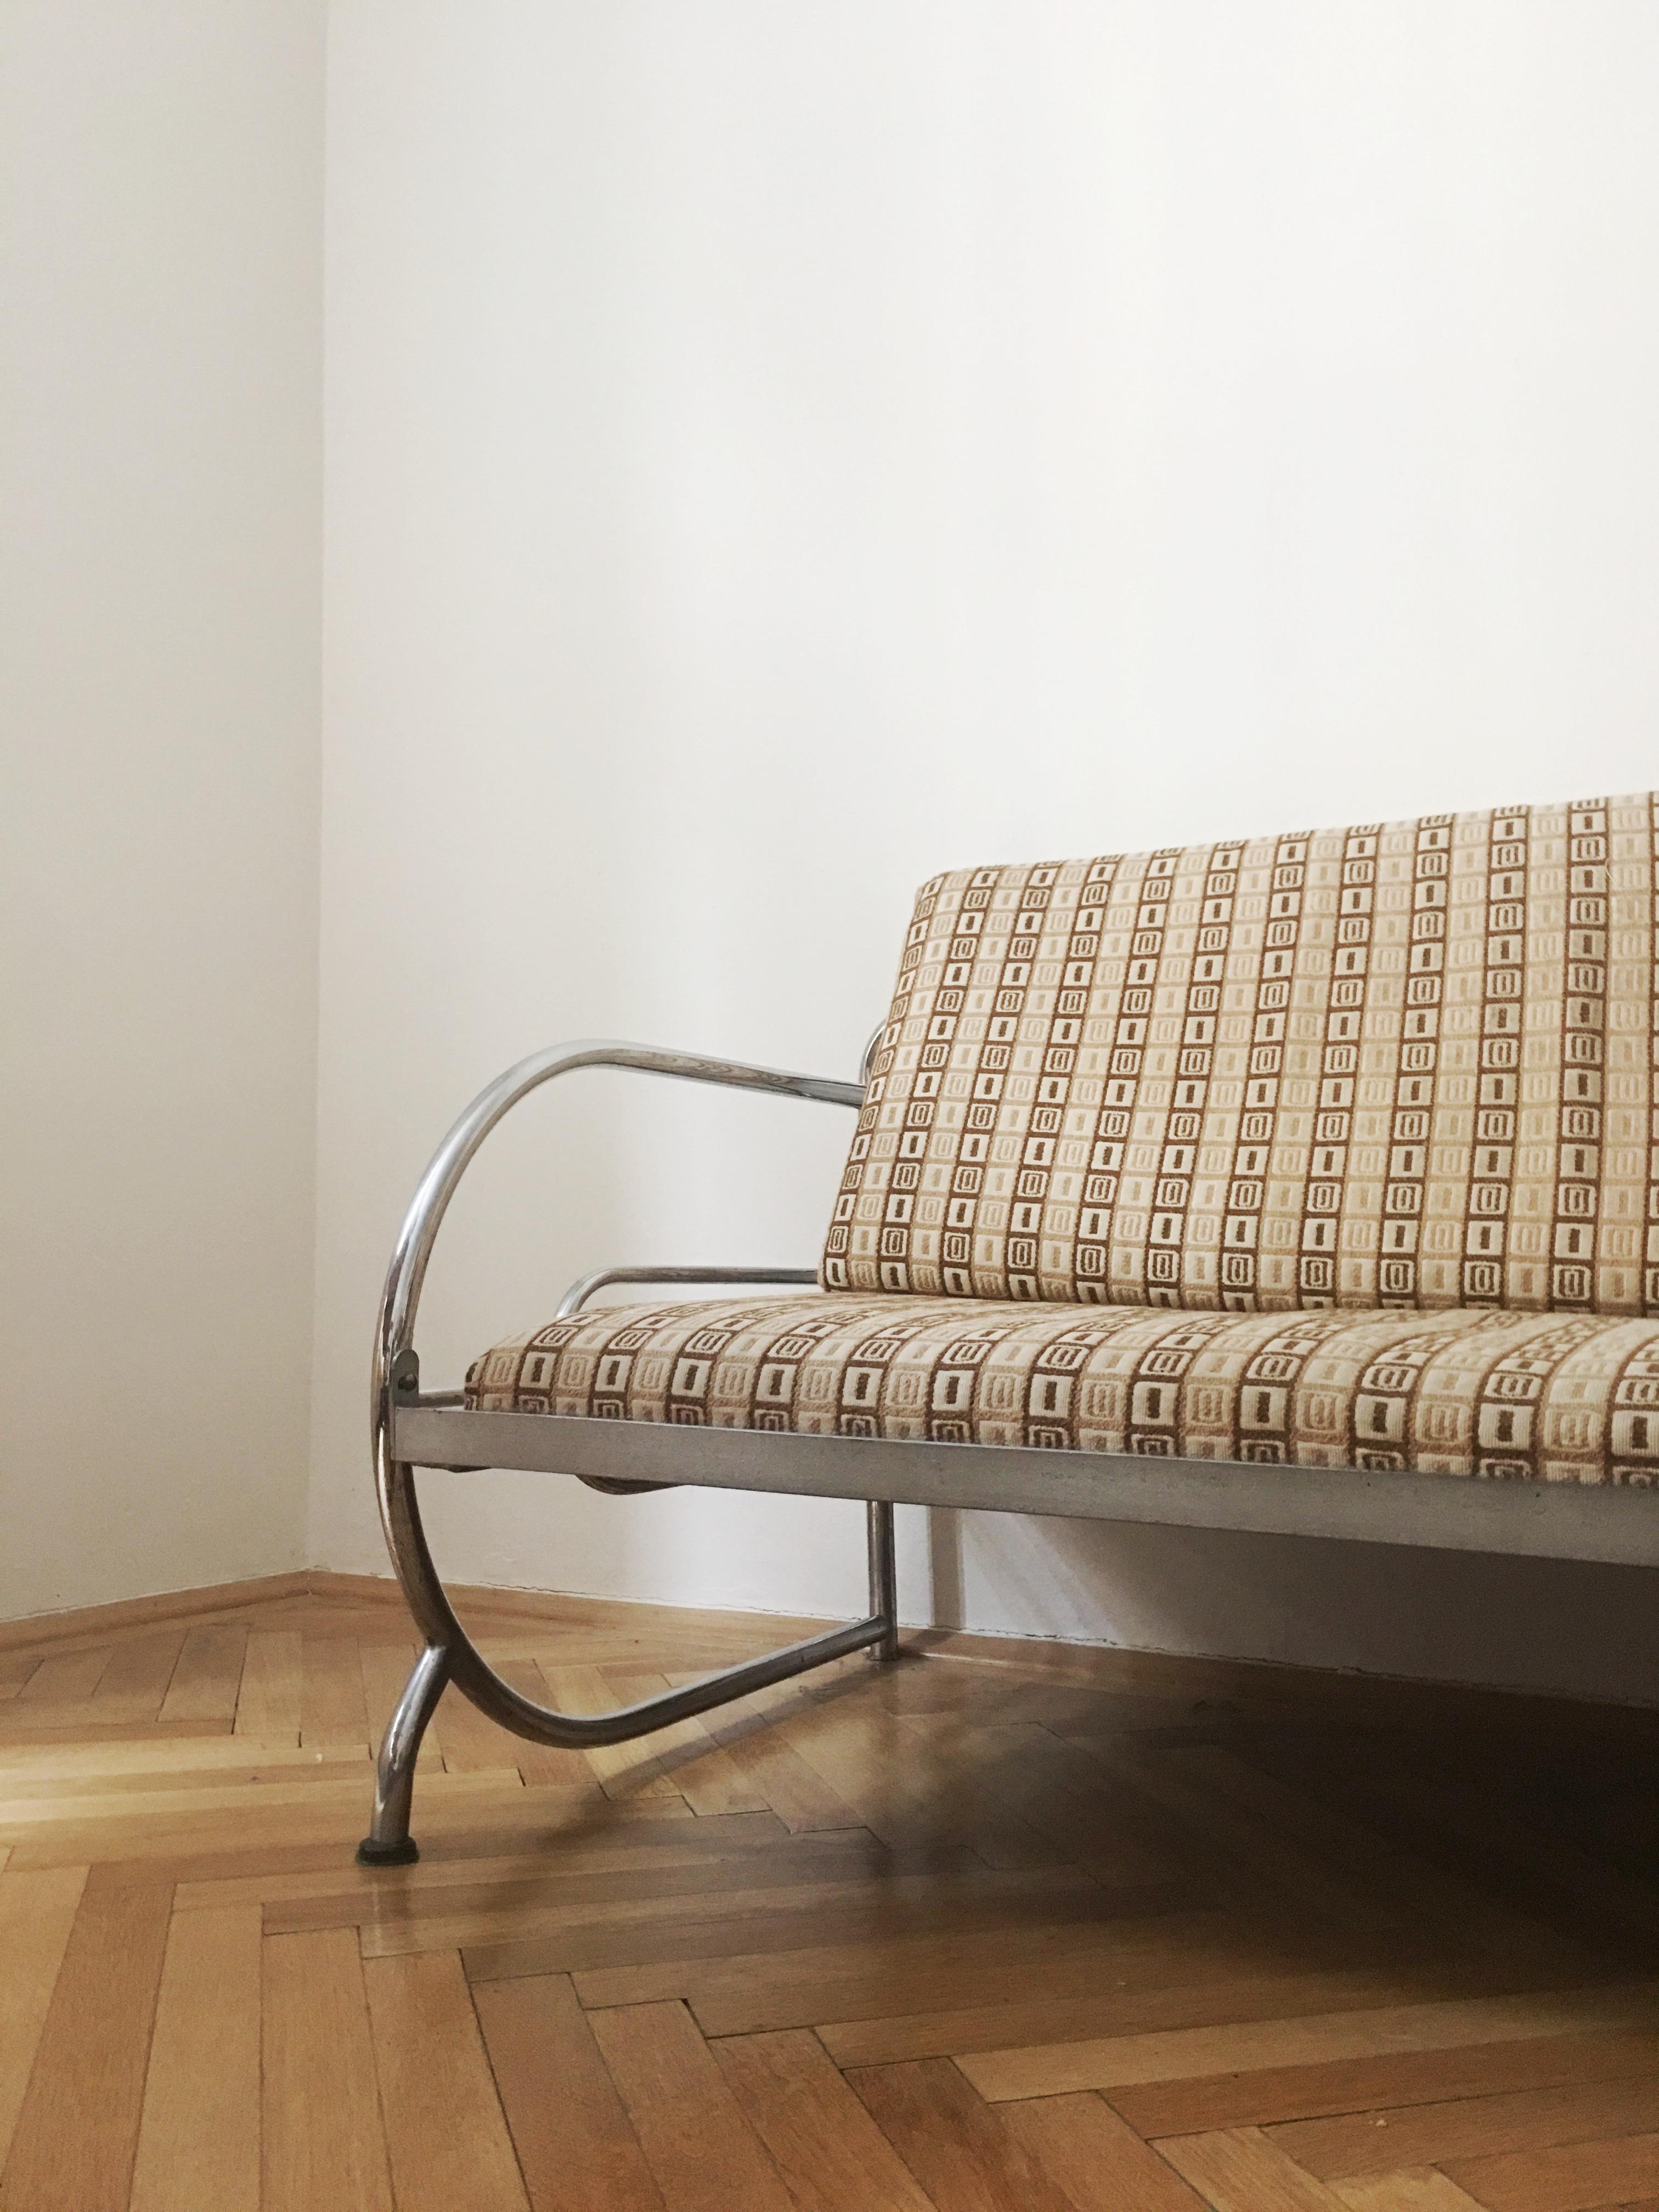 Functionalism tubular steel couch designed by Robert Slezak, Czech Republic, 1930s, tubular steel frame.
Dimensions of sofa:
L x W x H - 194 cm x 81 cm x 83 cm.
We are selling this products with mattress.